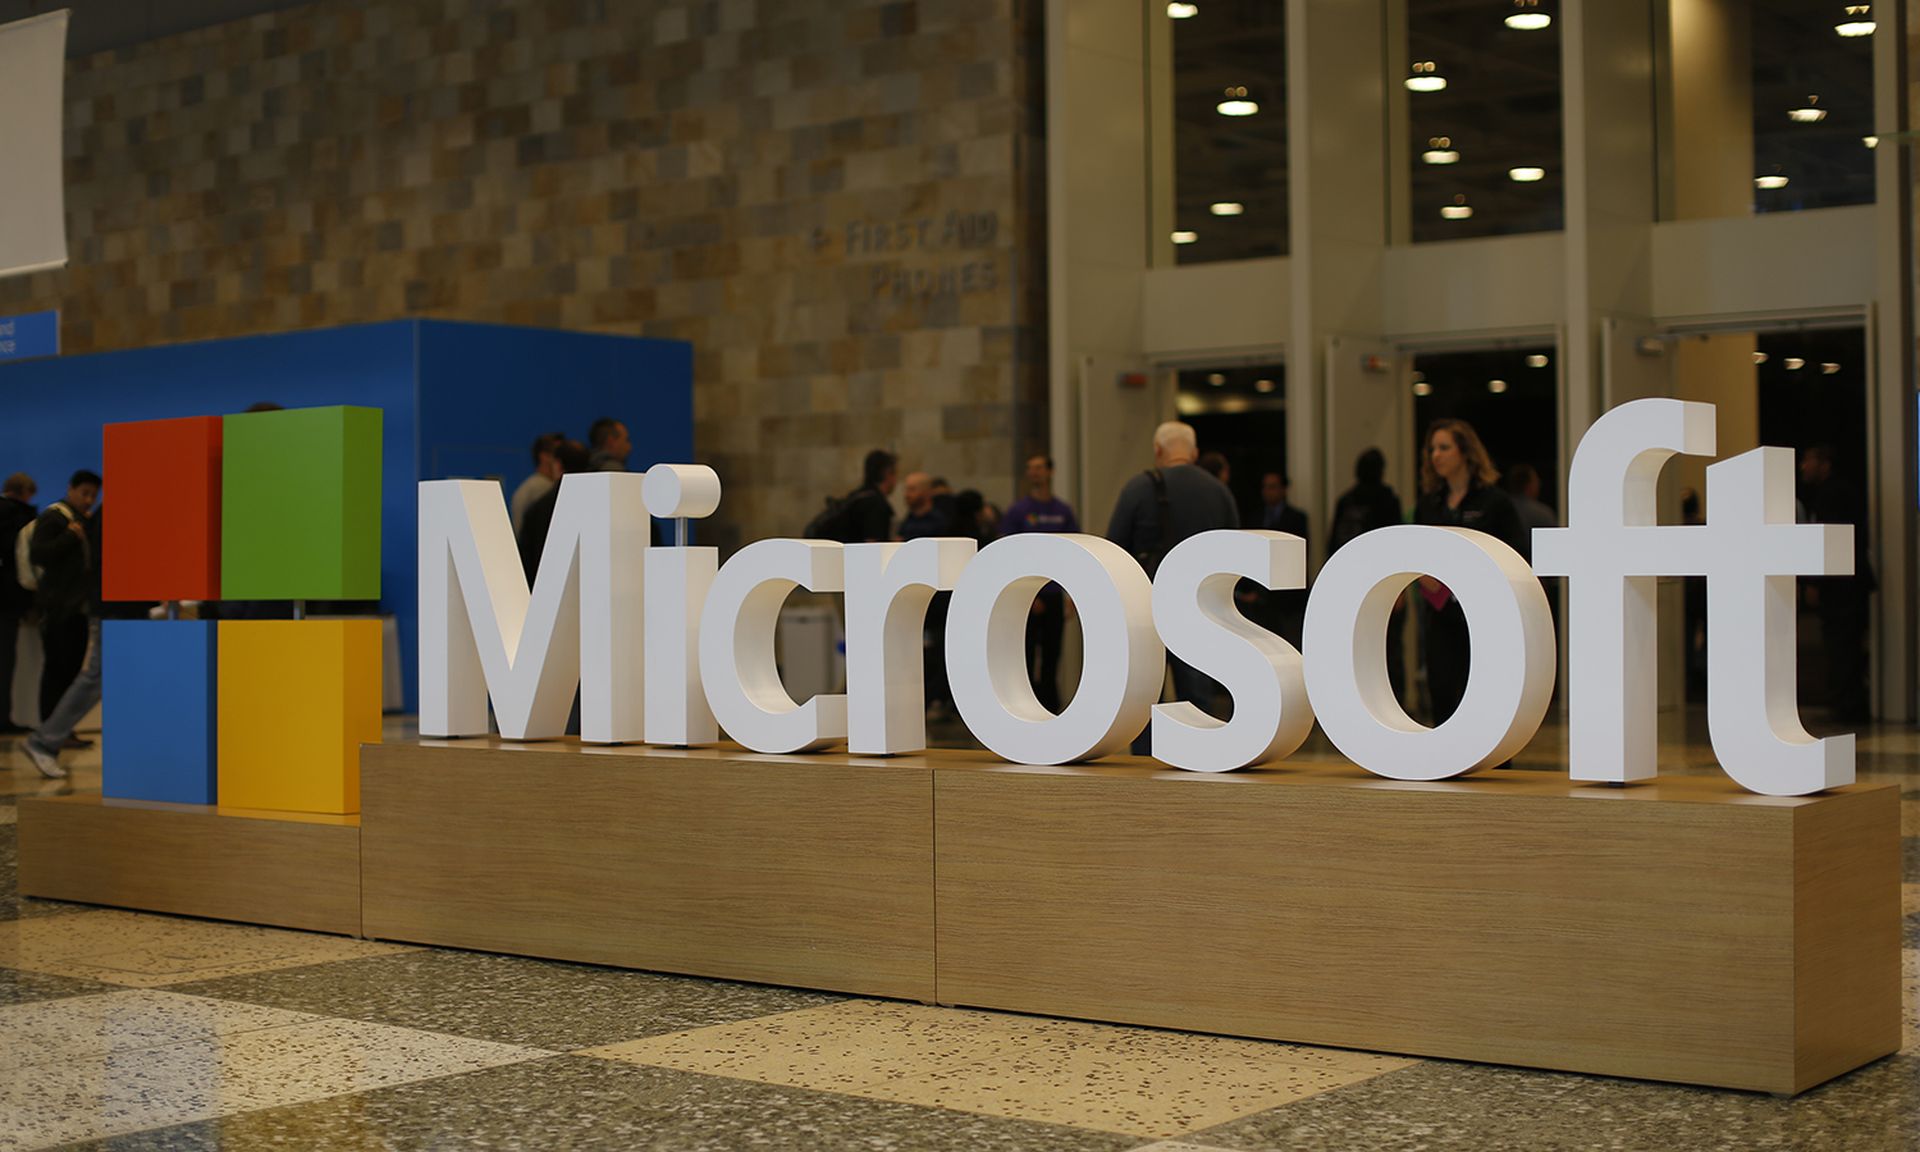 A Microsoft logo is seen during an event.